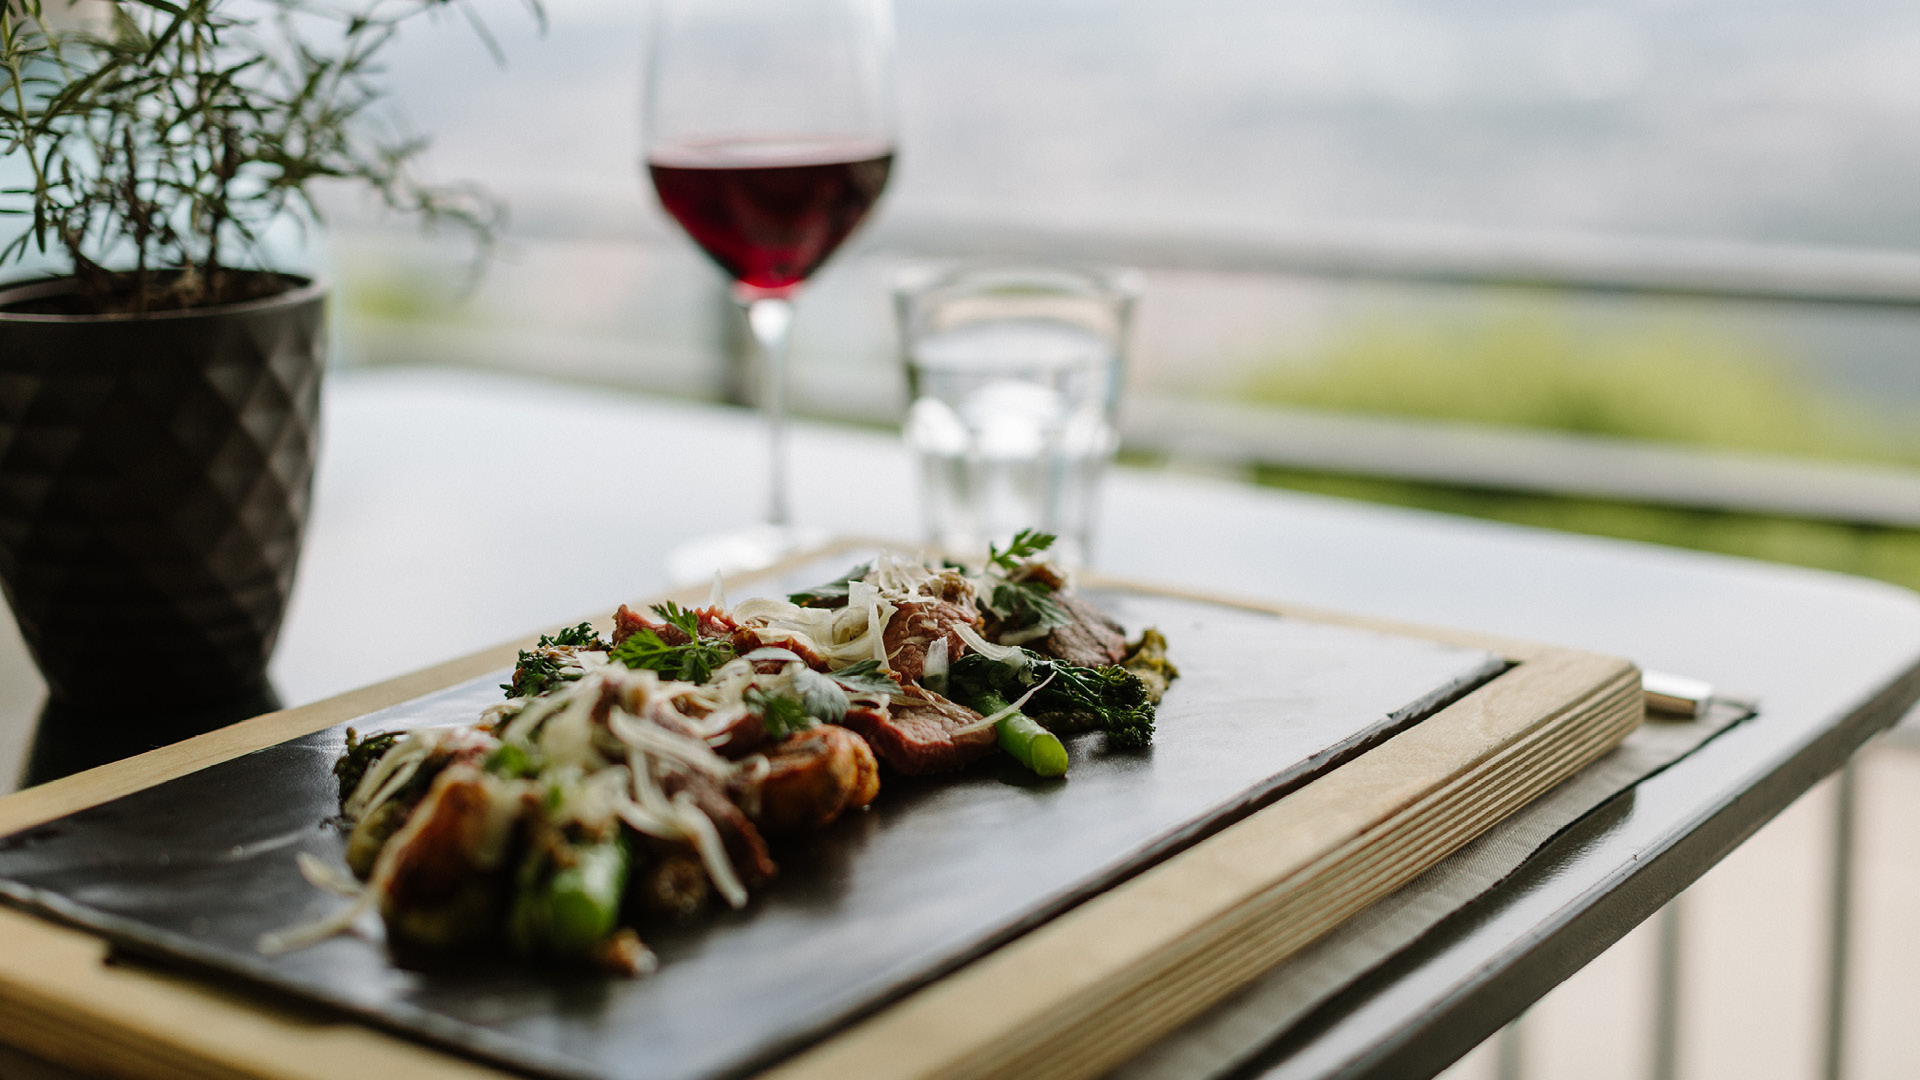 Veal tagliata on a slat serving plate with a glass of red wine